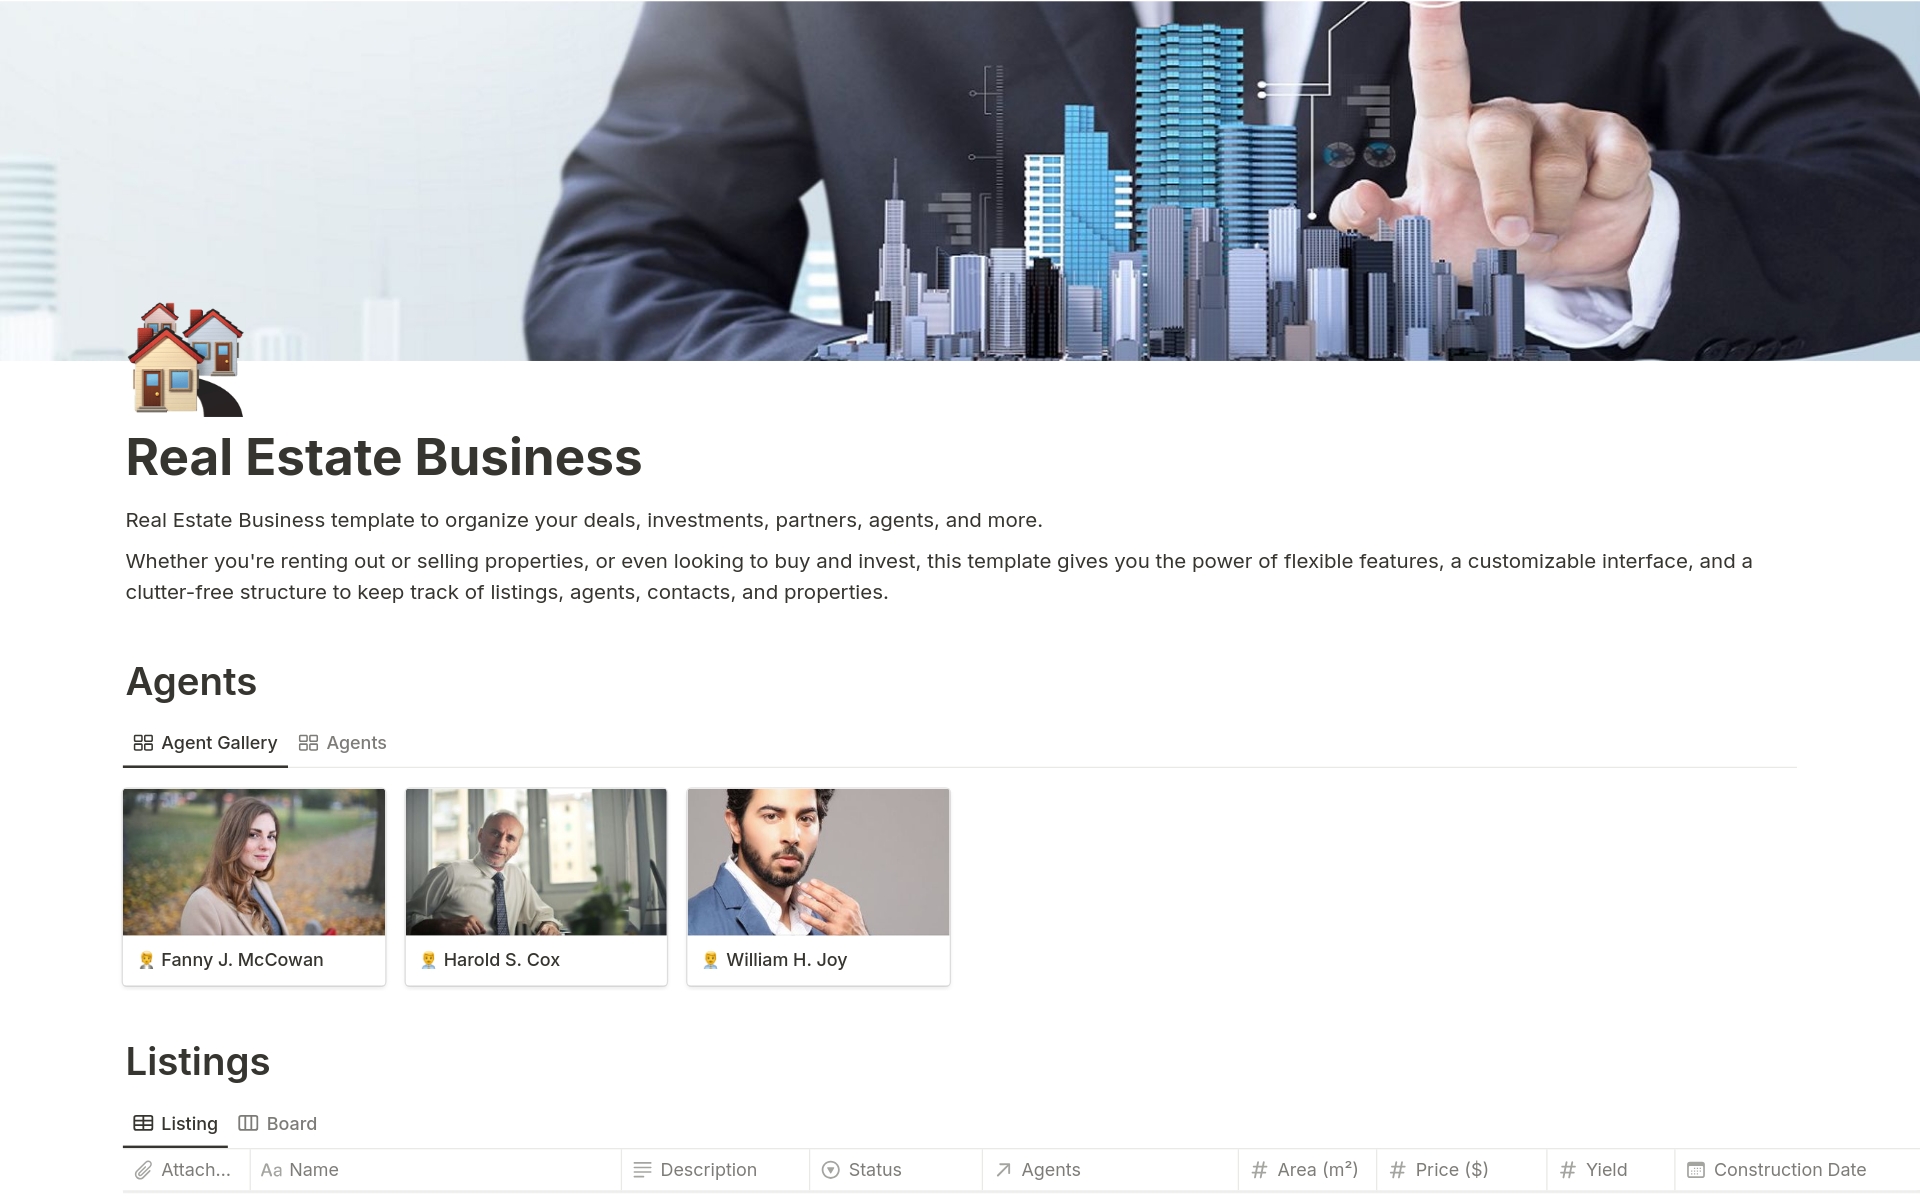 Real Estate Business template to organize your deals, investments, partners, agents, and more.
